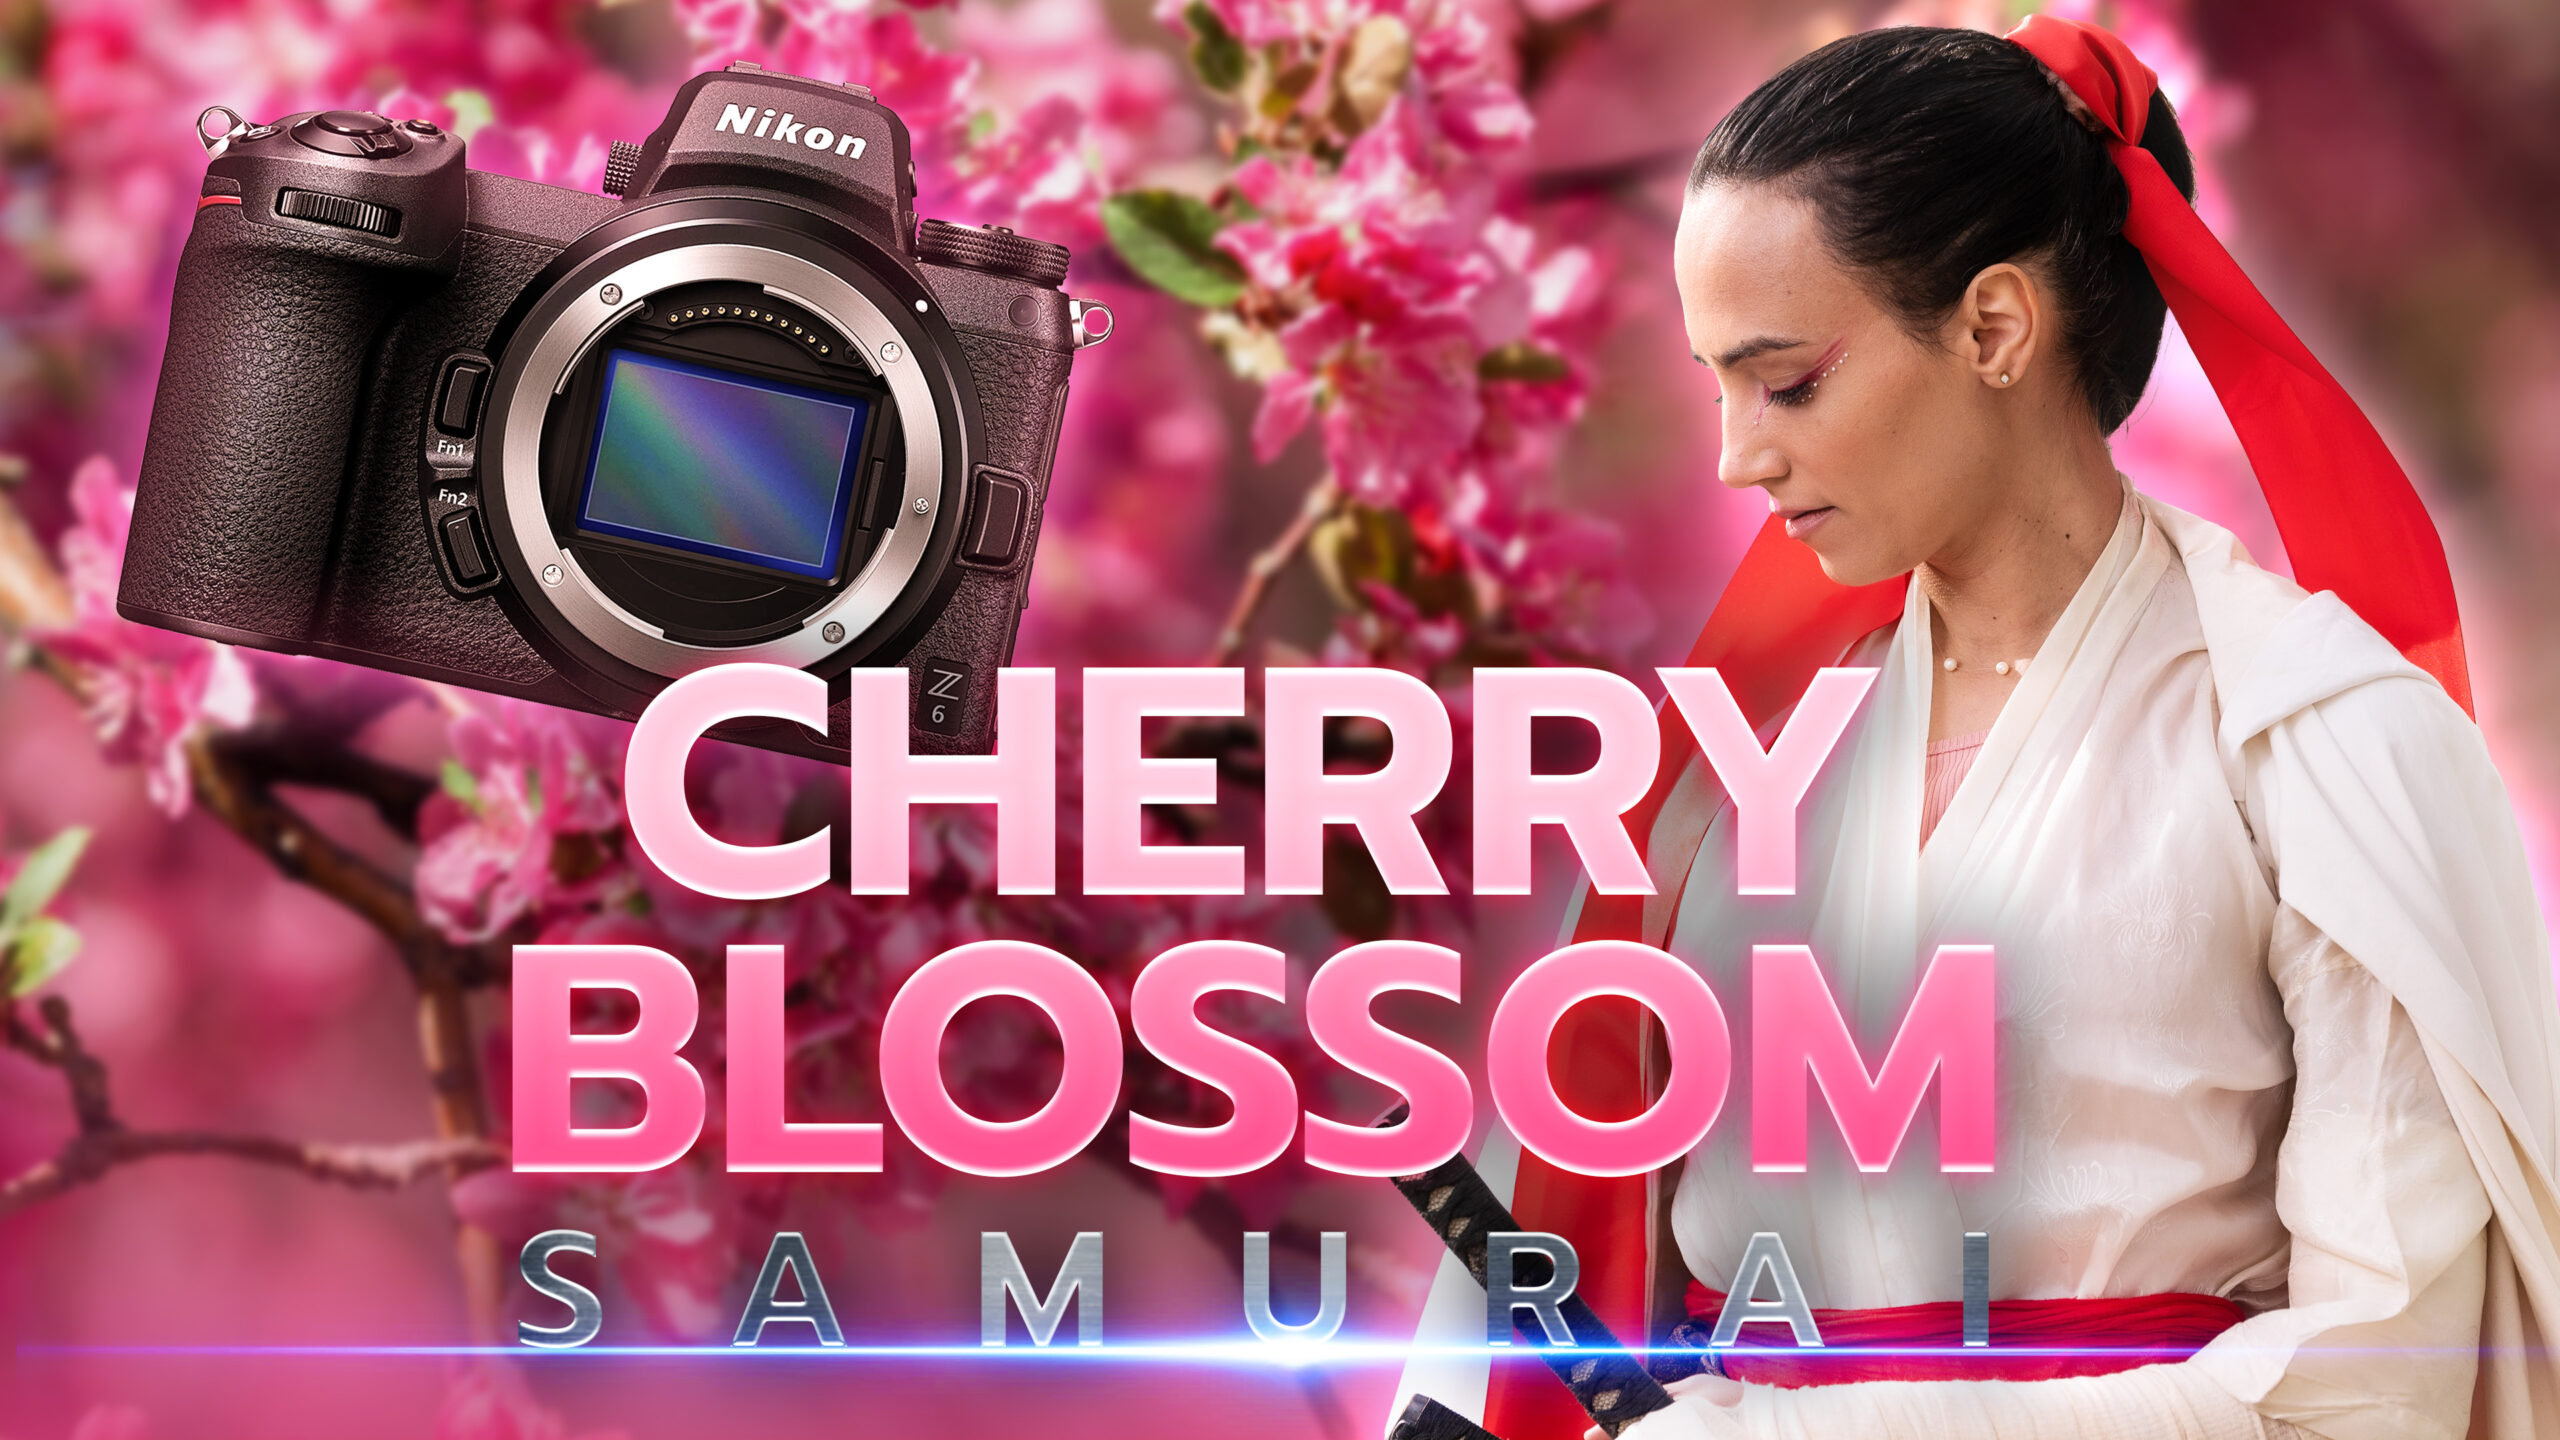 You are currently viewing Cherry Blossom Samurai Photoshoot